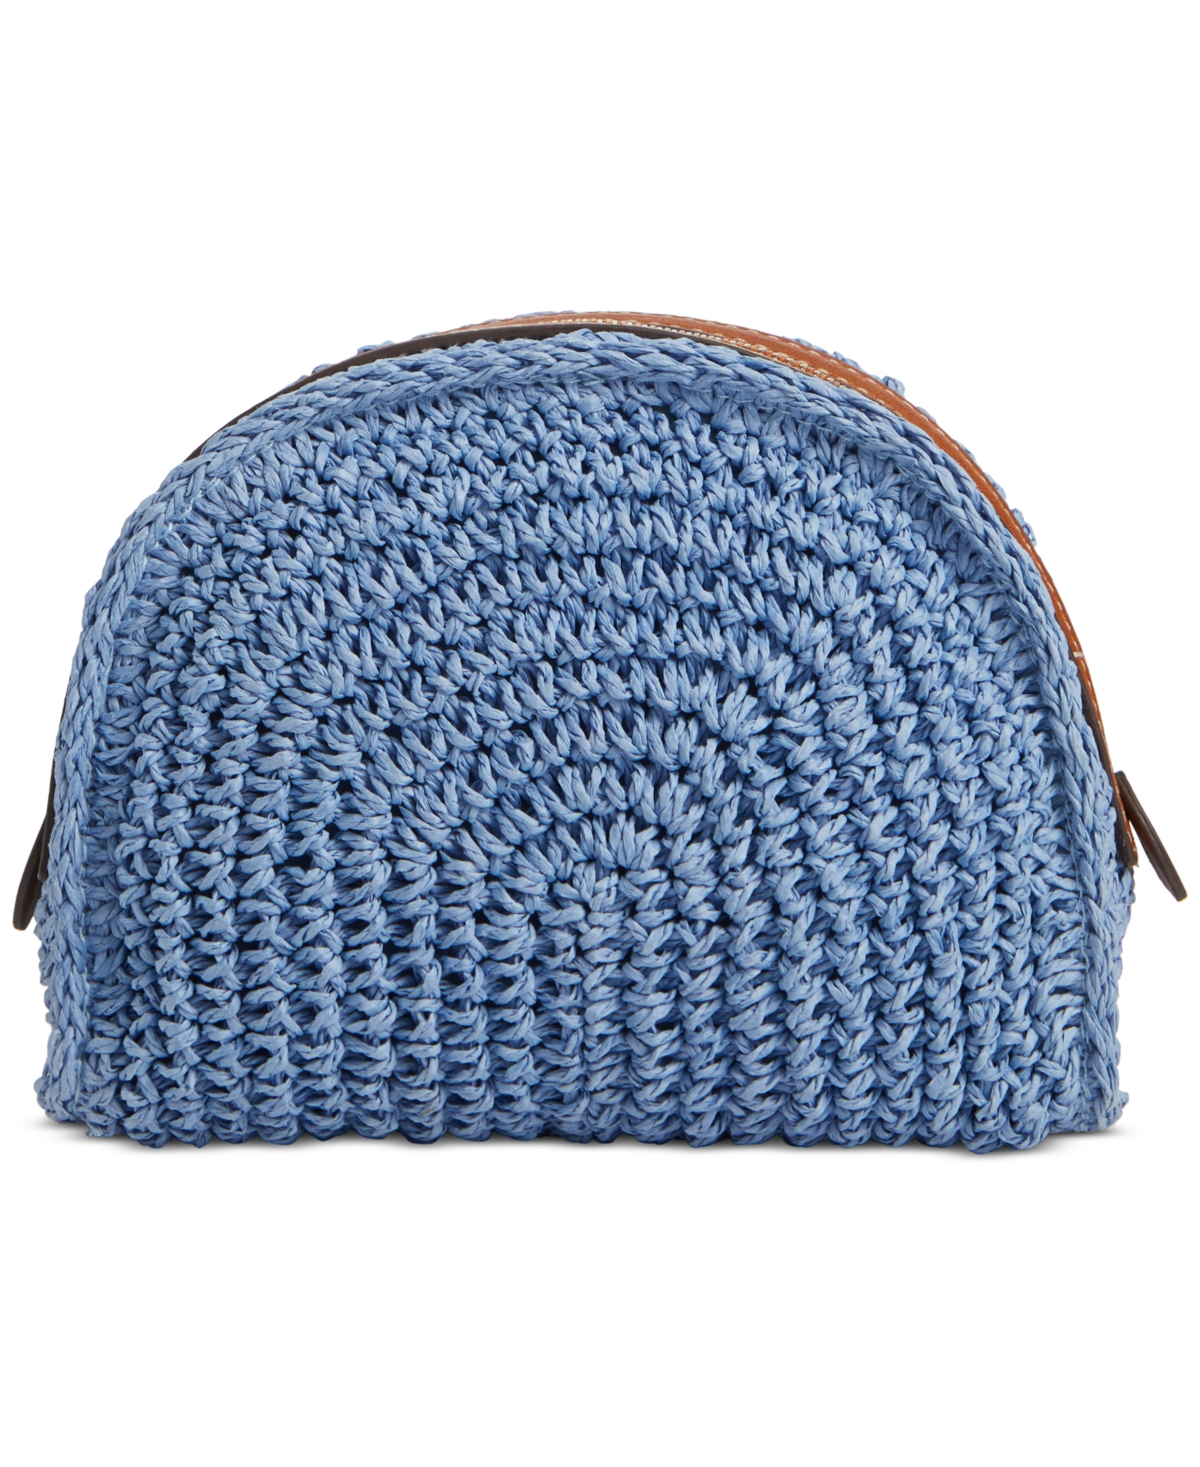 Flower Show Small Dome Pouch, Created for Macy's - Blue Raffia